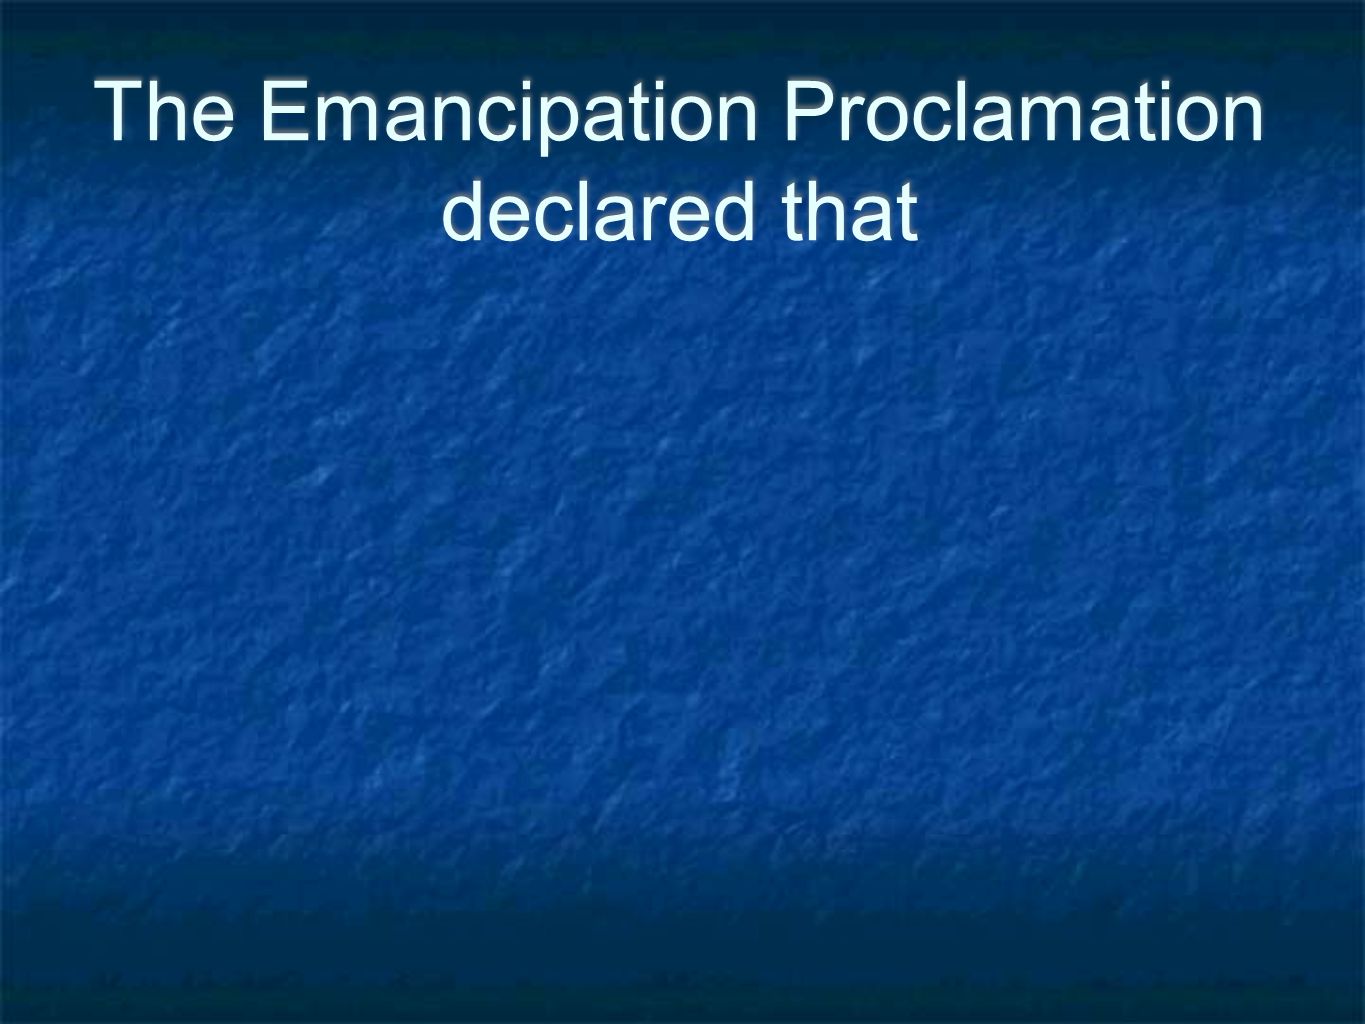 The Emancipation Proclamation declared that